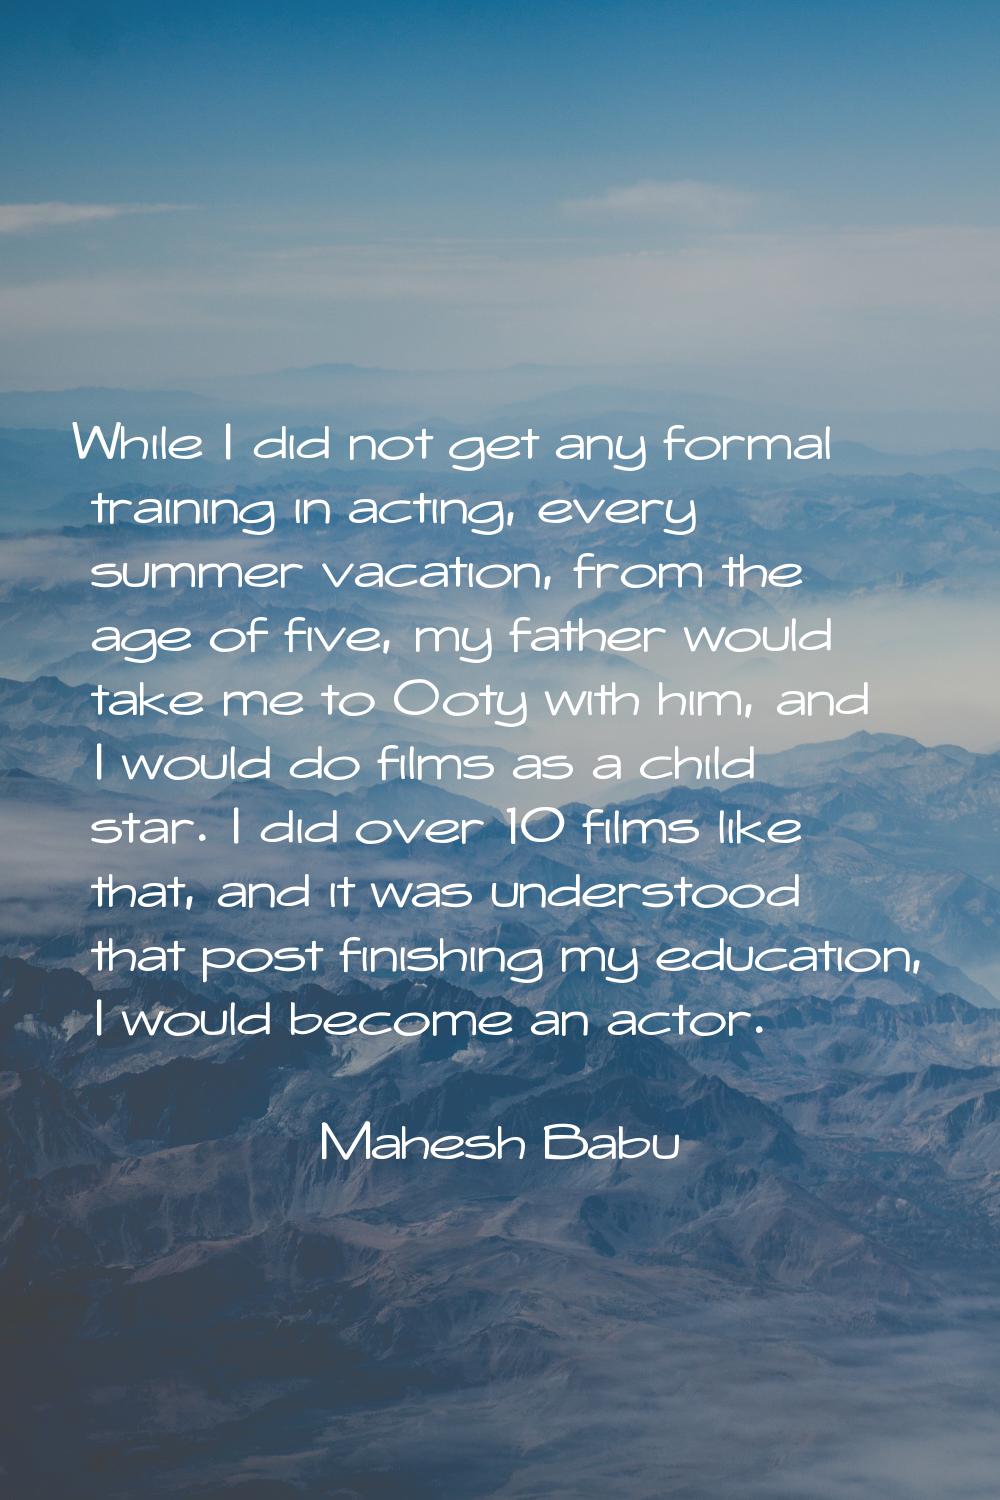 While I did not get any formal training in acting, every summer vacation, from the age of five, my 